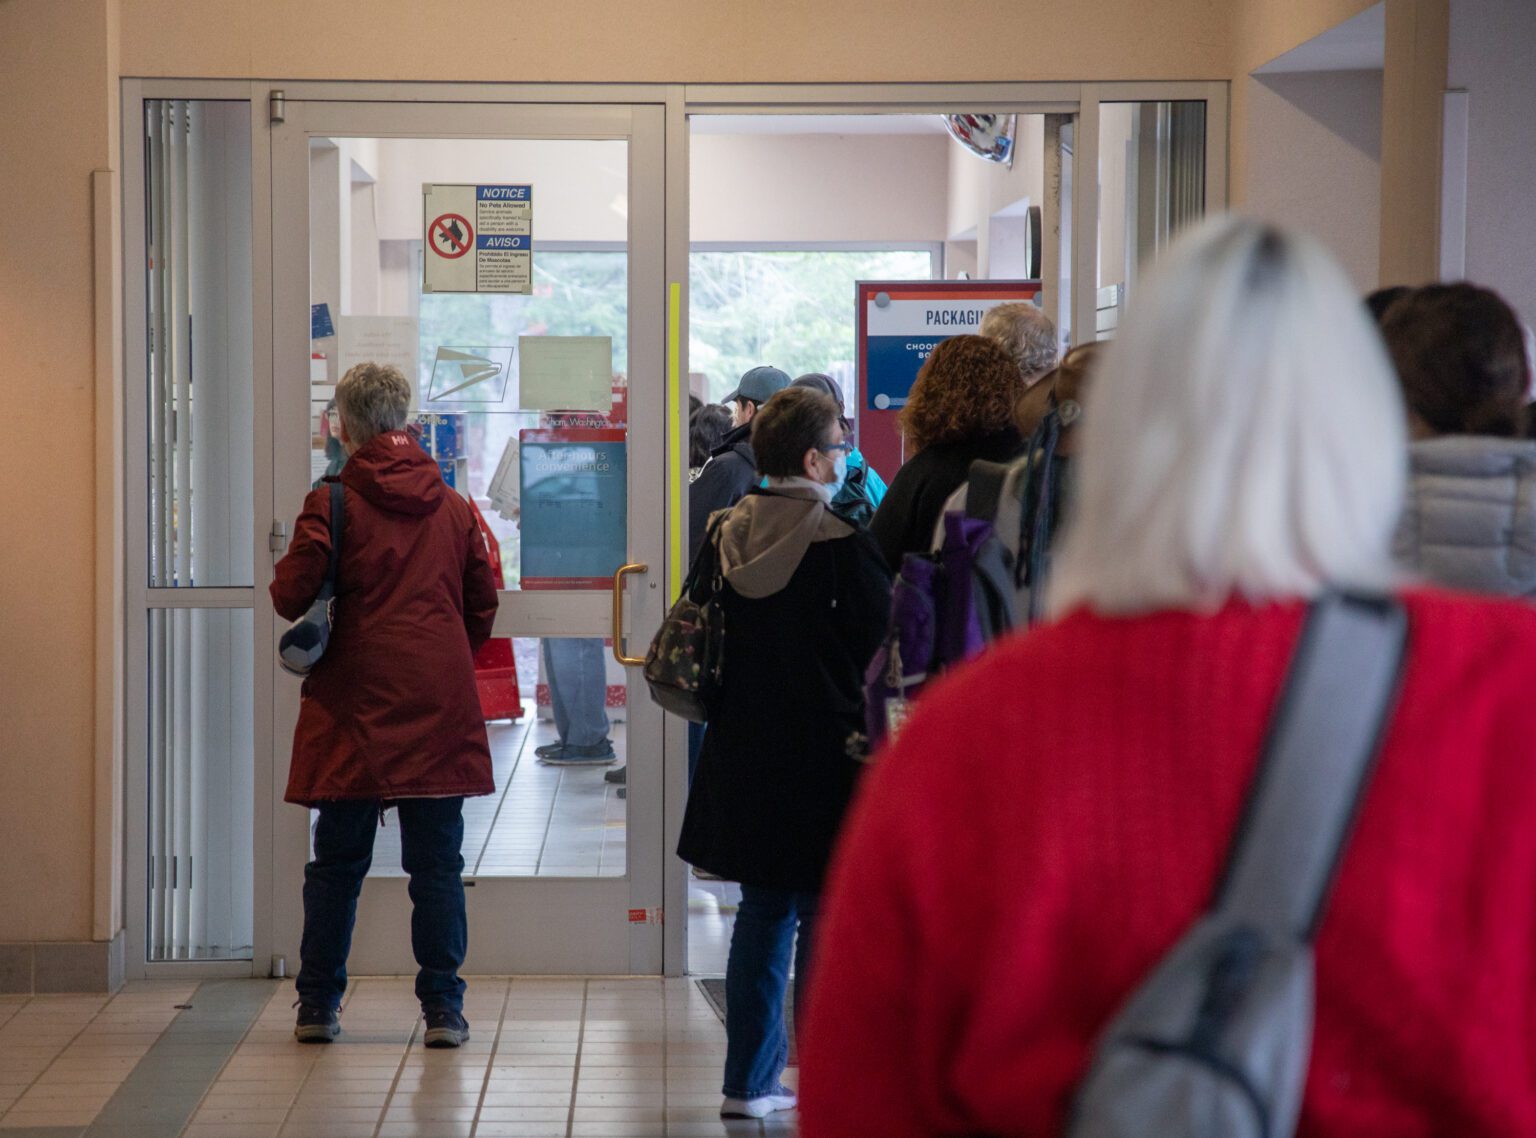 Around two dozen people wait in line for packages at the U.S. Post Office off of Orleans Street in Bellingham on Jan 3. Delays have persisted